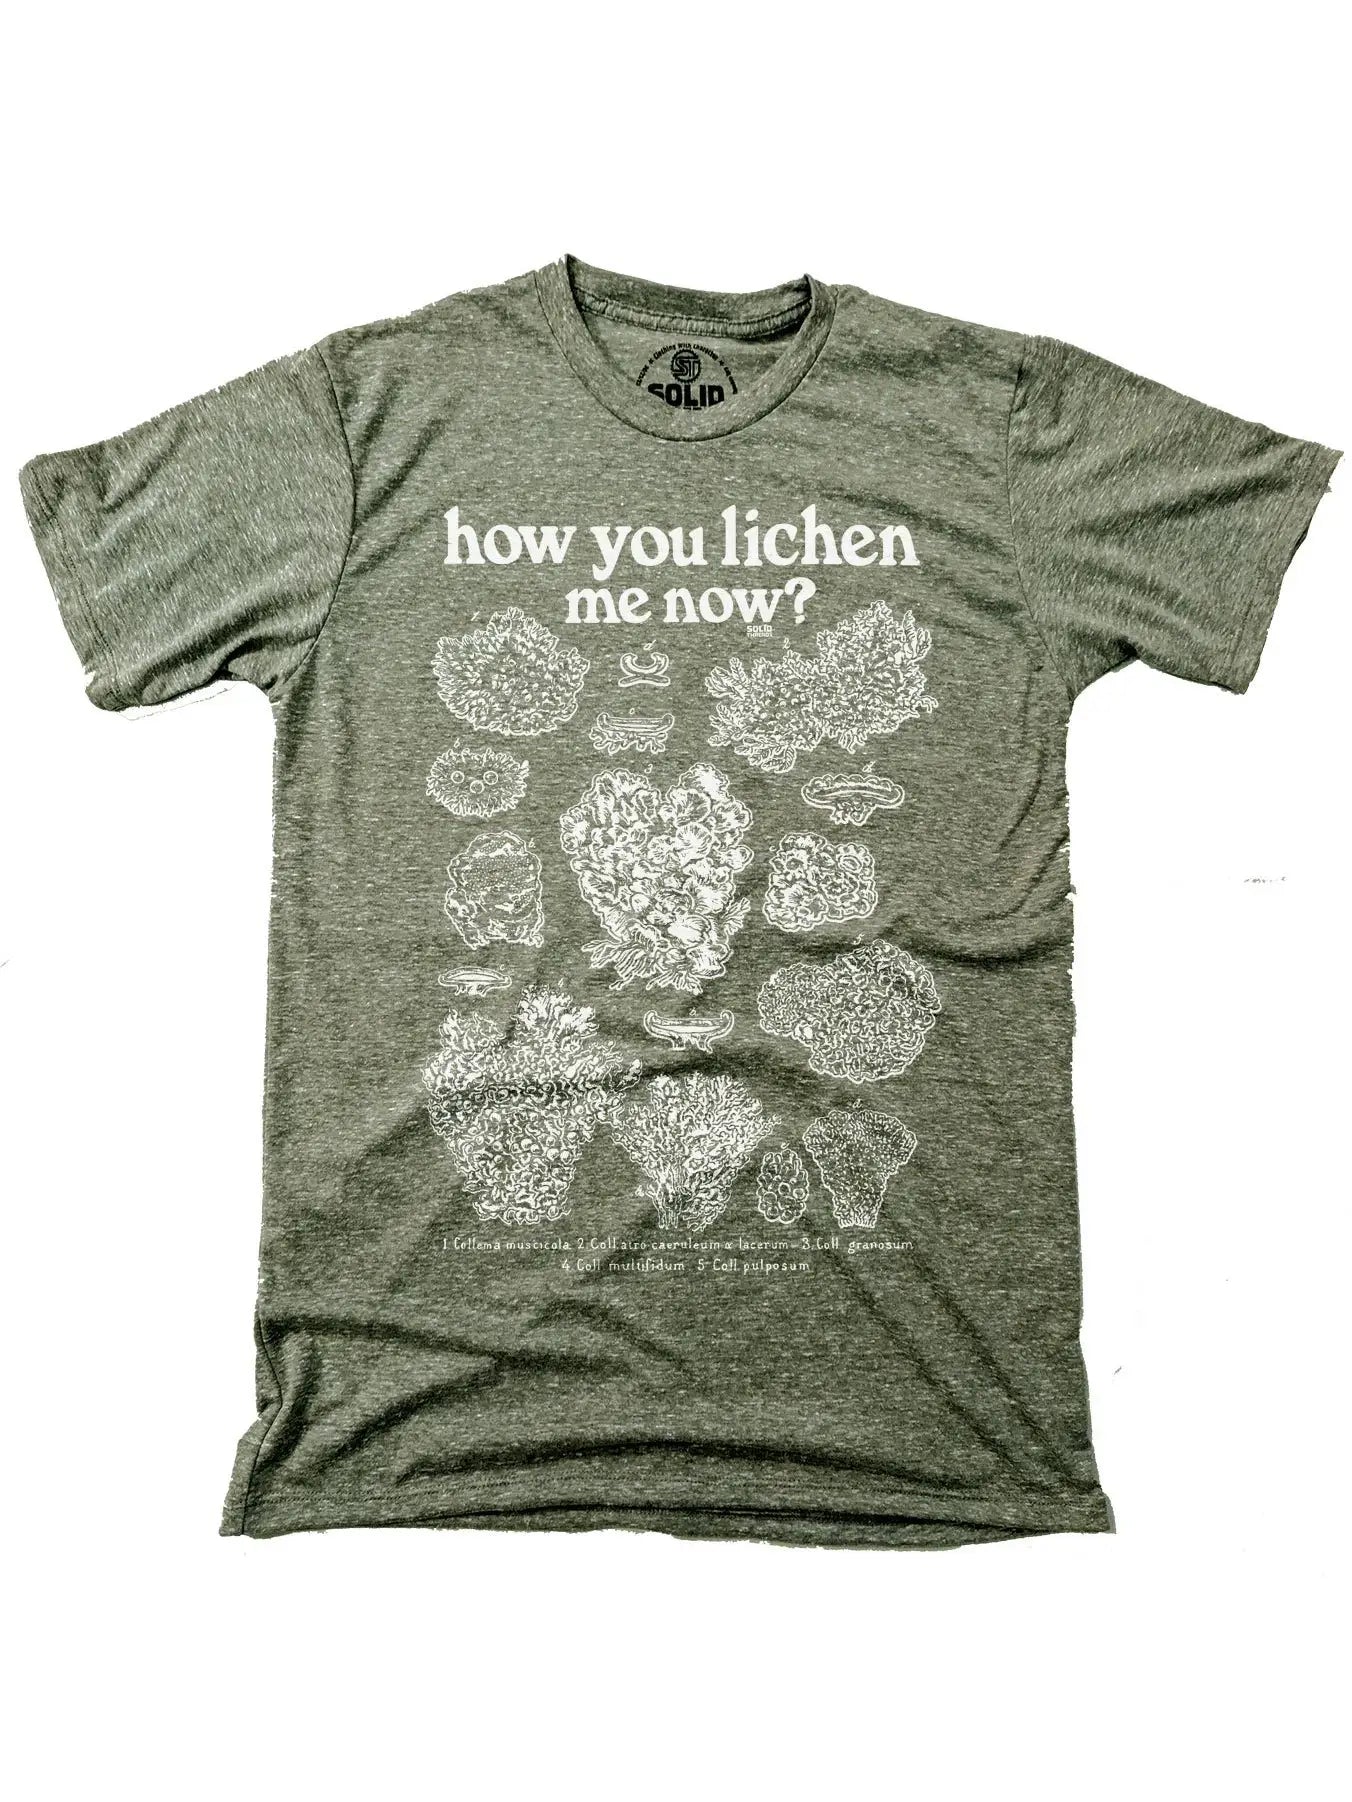 HOW YOU LICHEN ME NOW tee